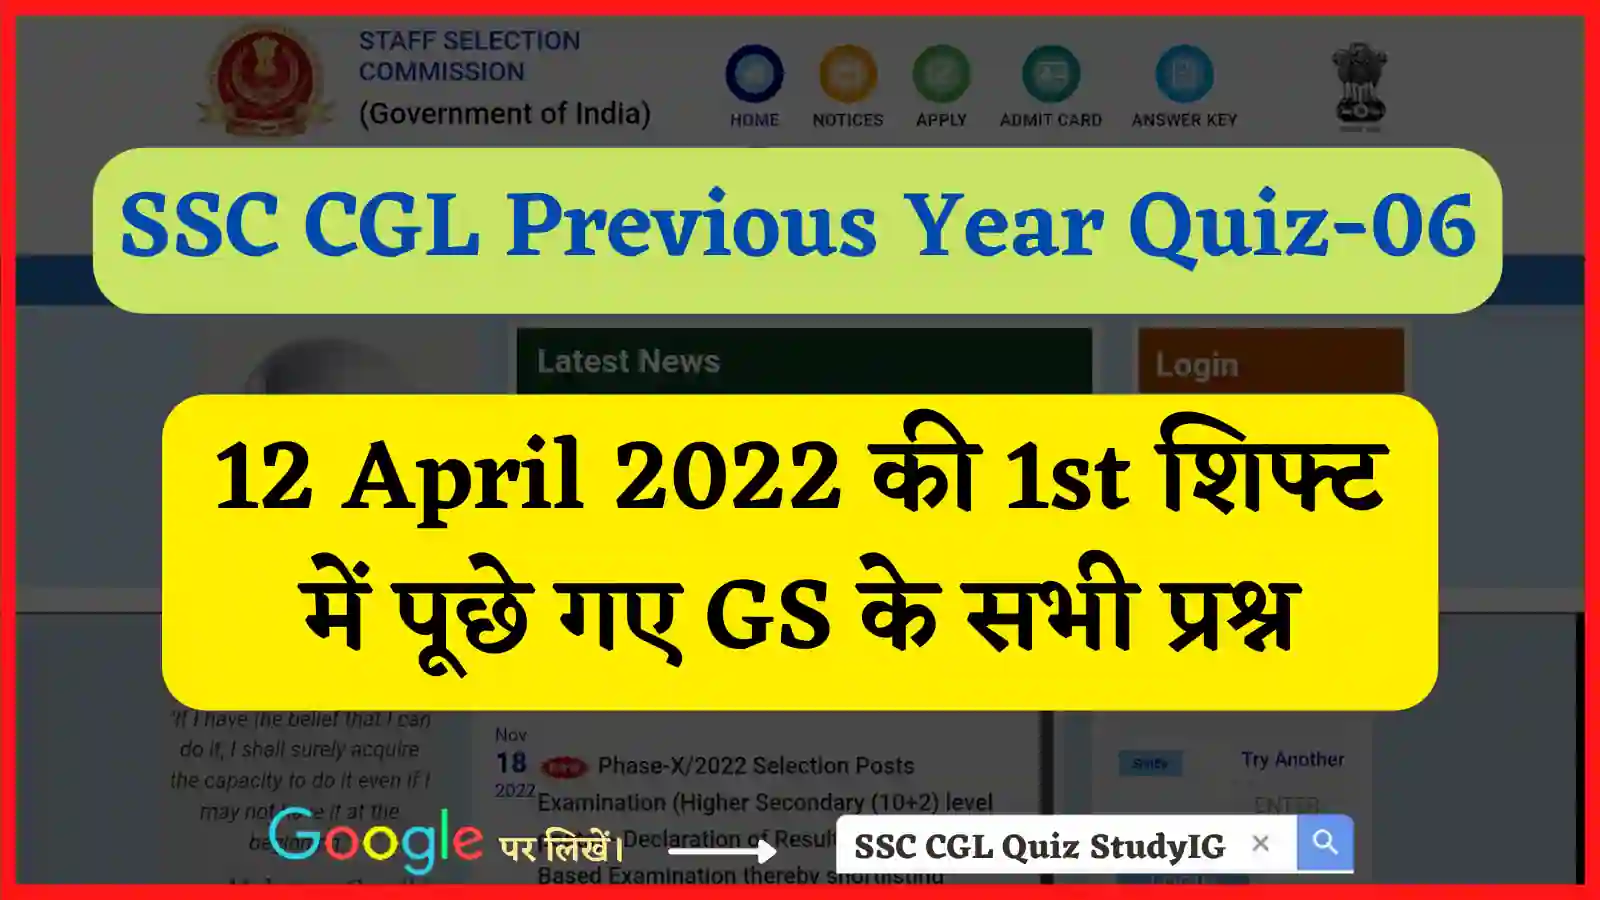 ssc cgl previous year quiz-06